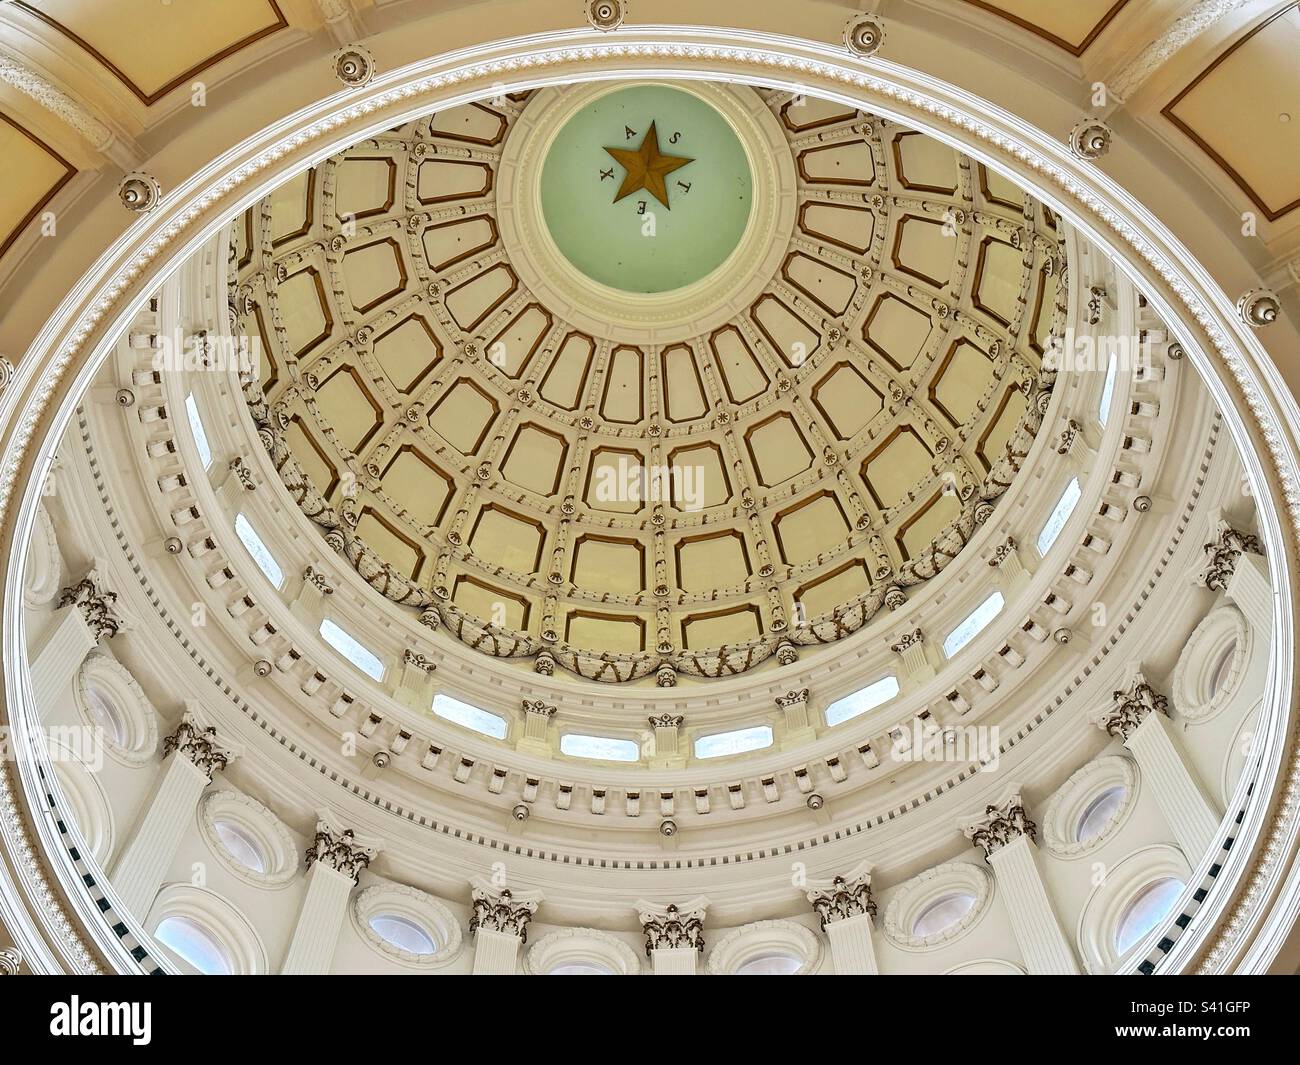 Domed ceiling of the Texas StateCapital building in Austin. No people. Stock Photo